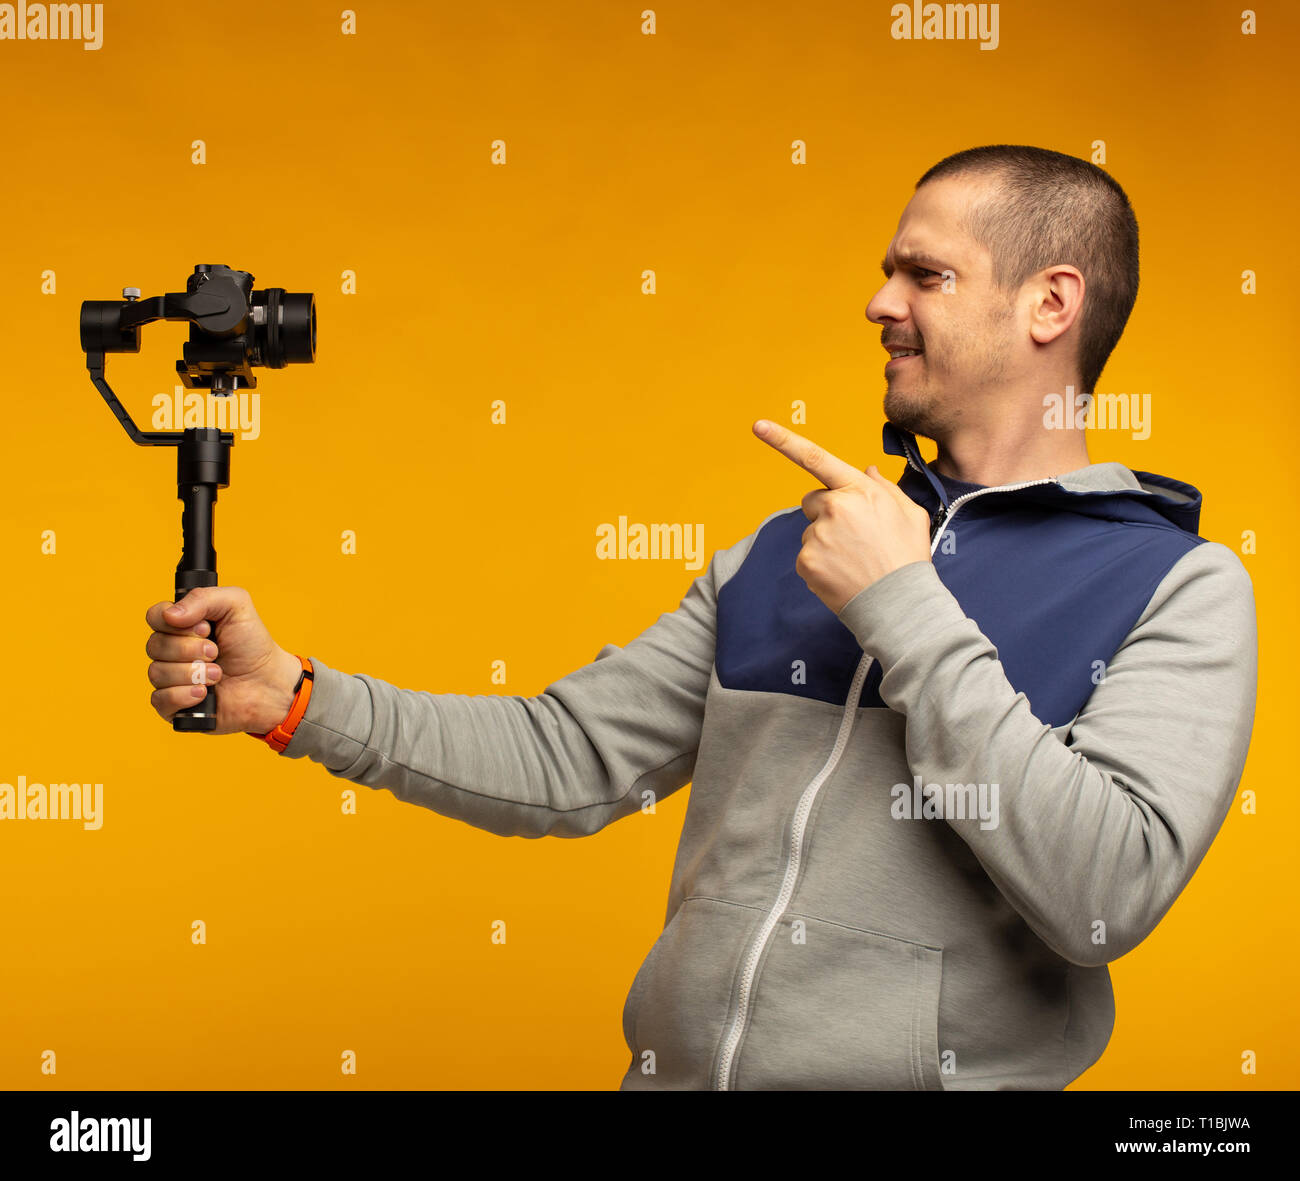 Man video blogger recording video and telling something for his audience Stock Photo